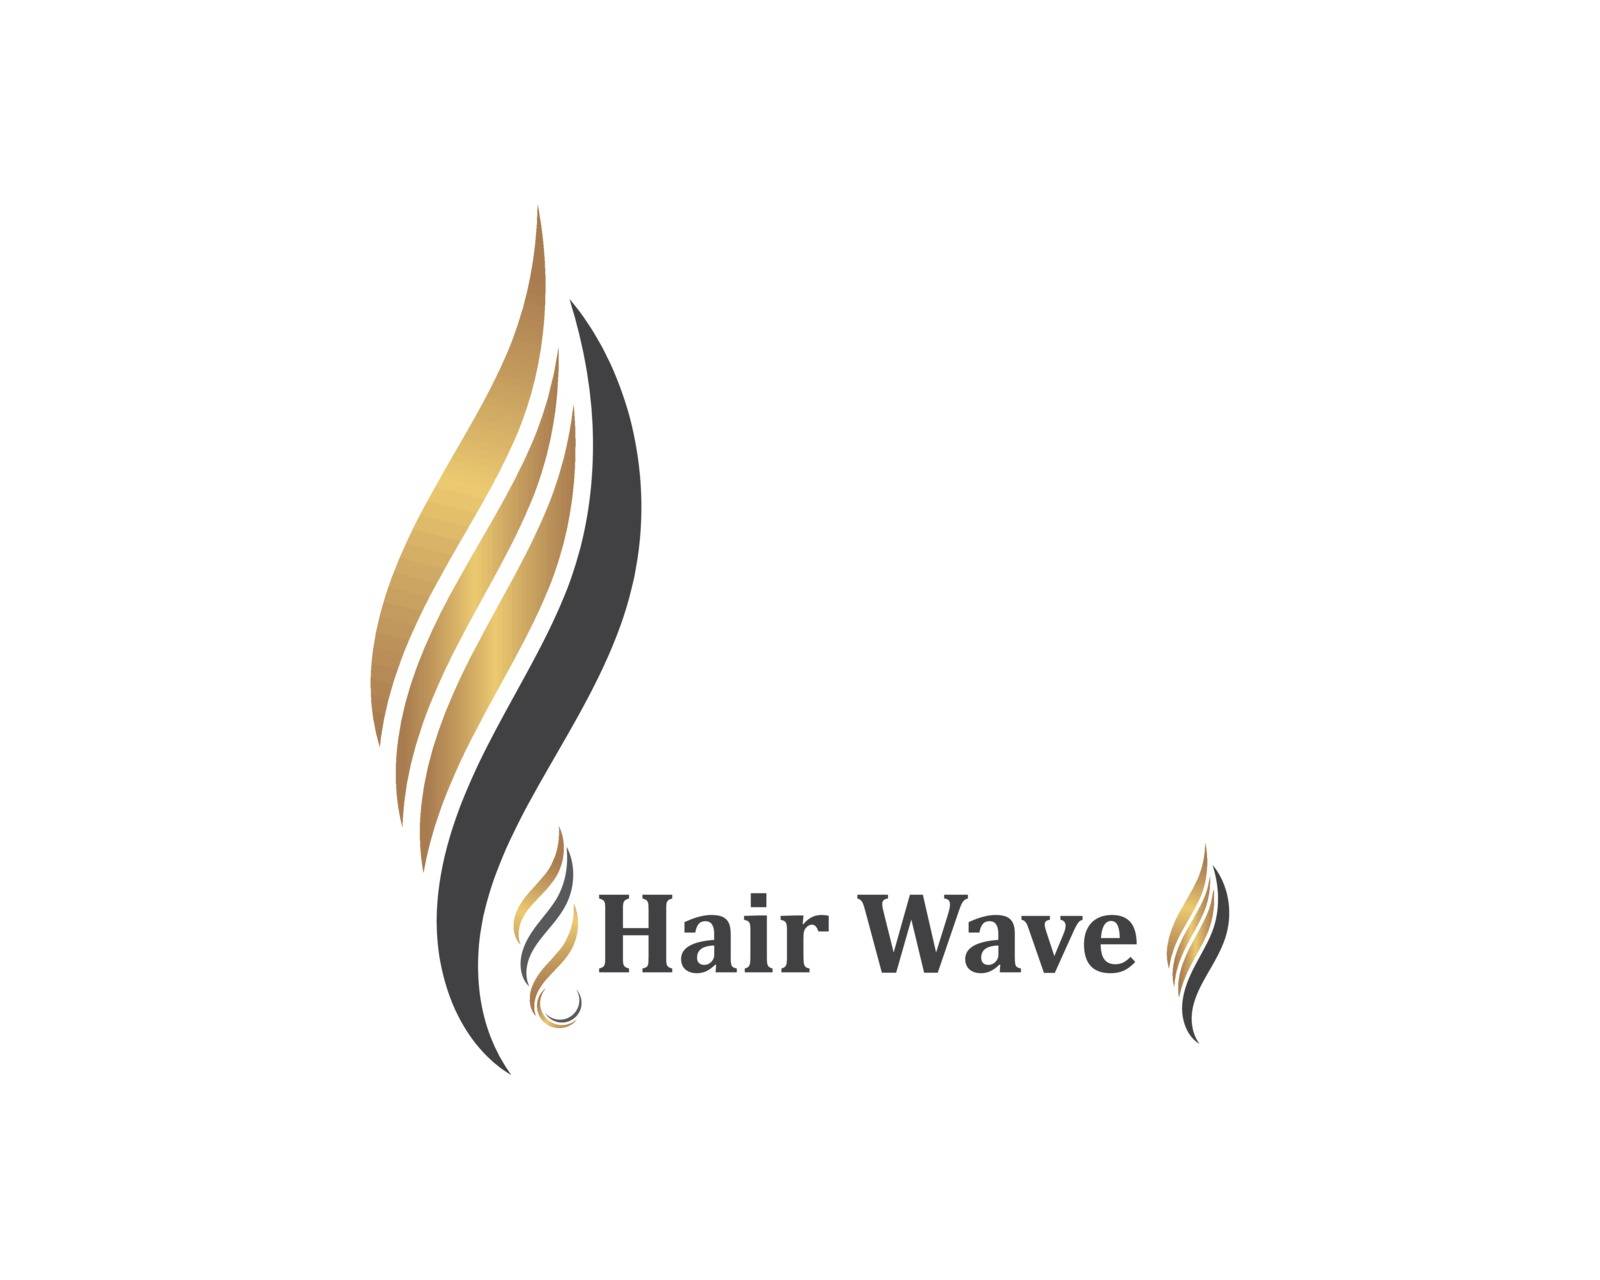 hair wave icon vector illustratin design symbol of hairstyle and by idan